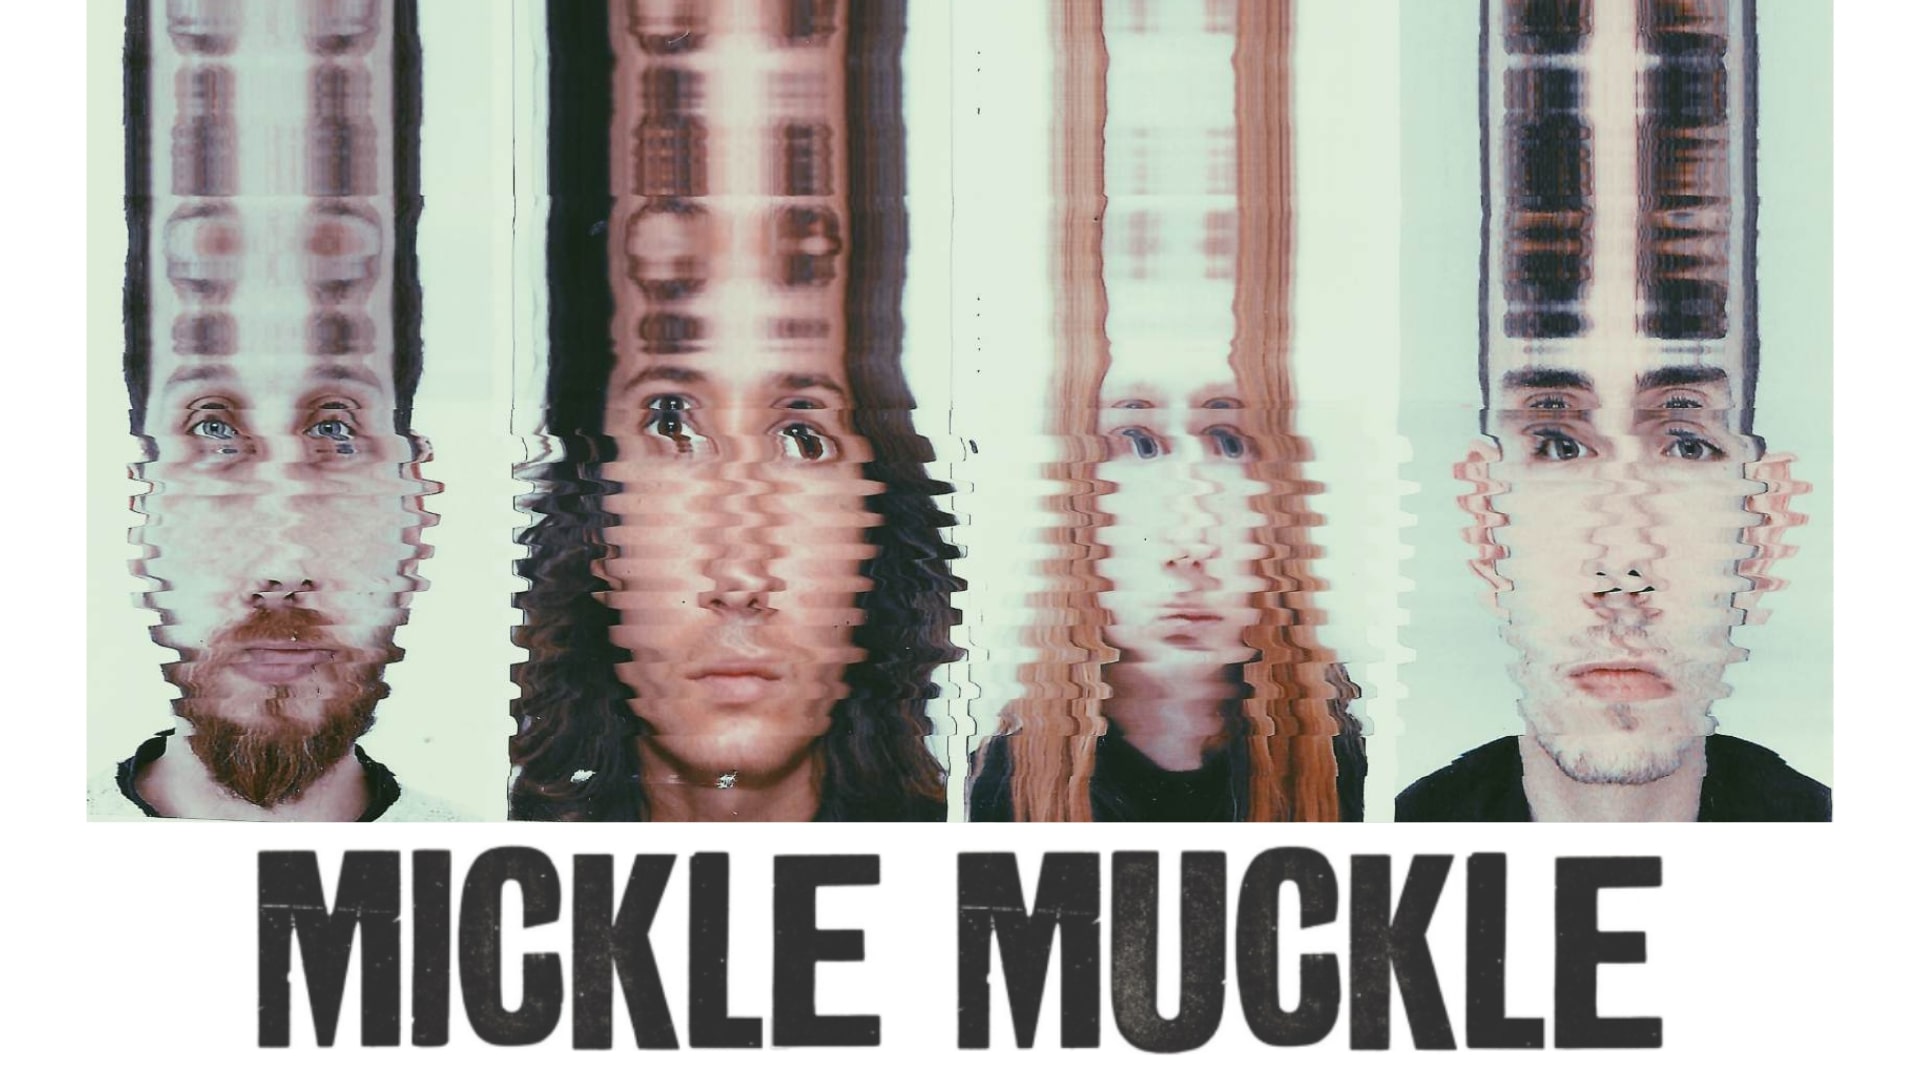 Mickle Muckle